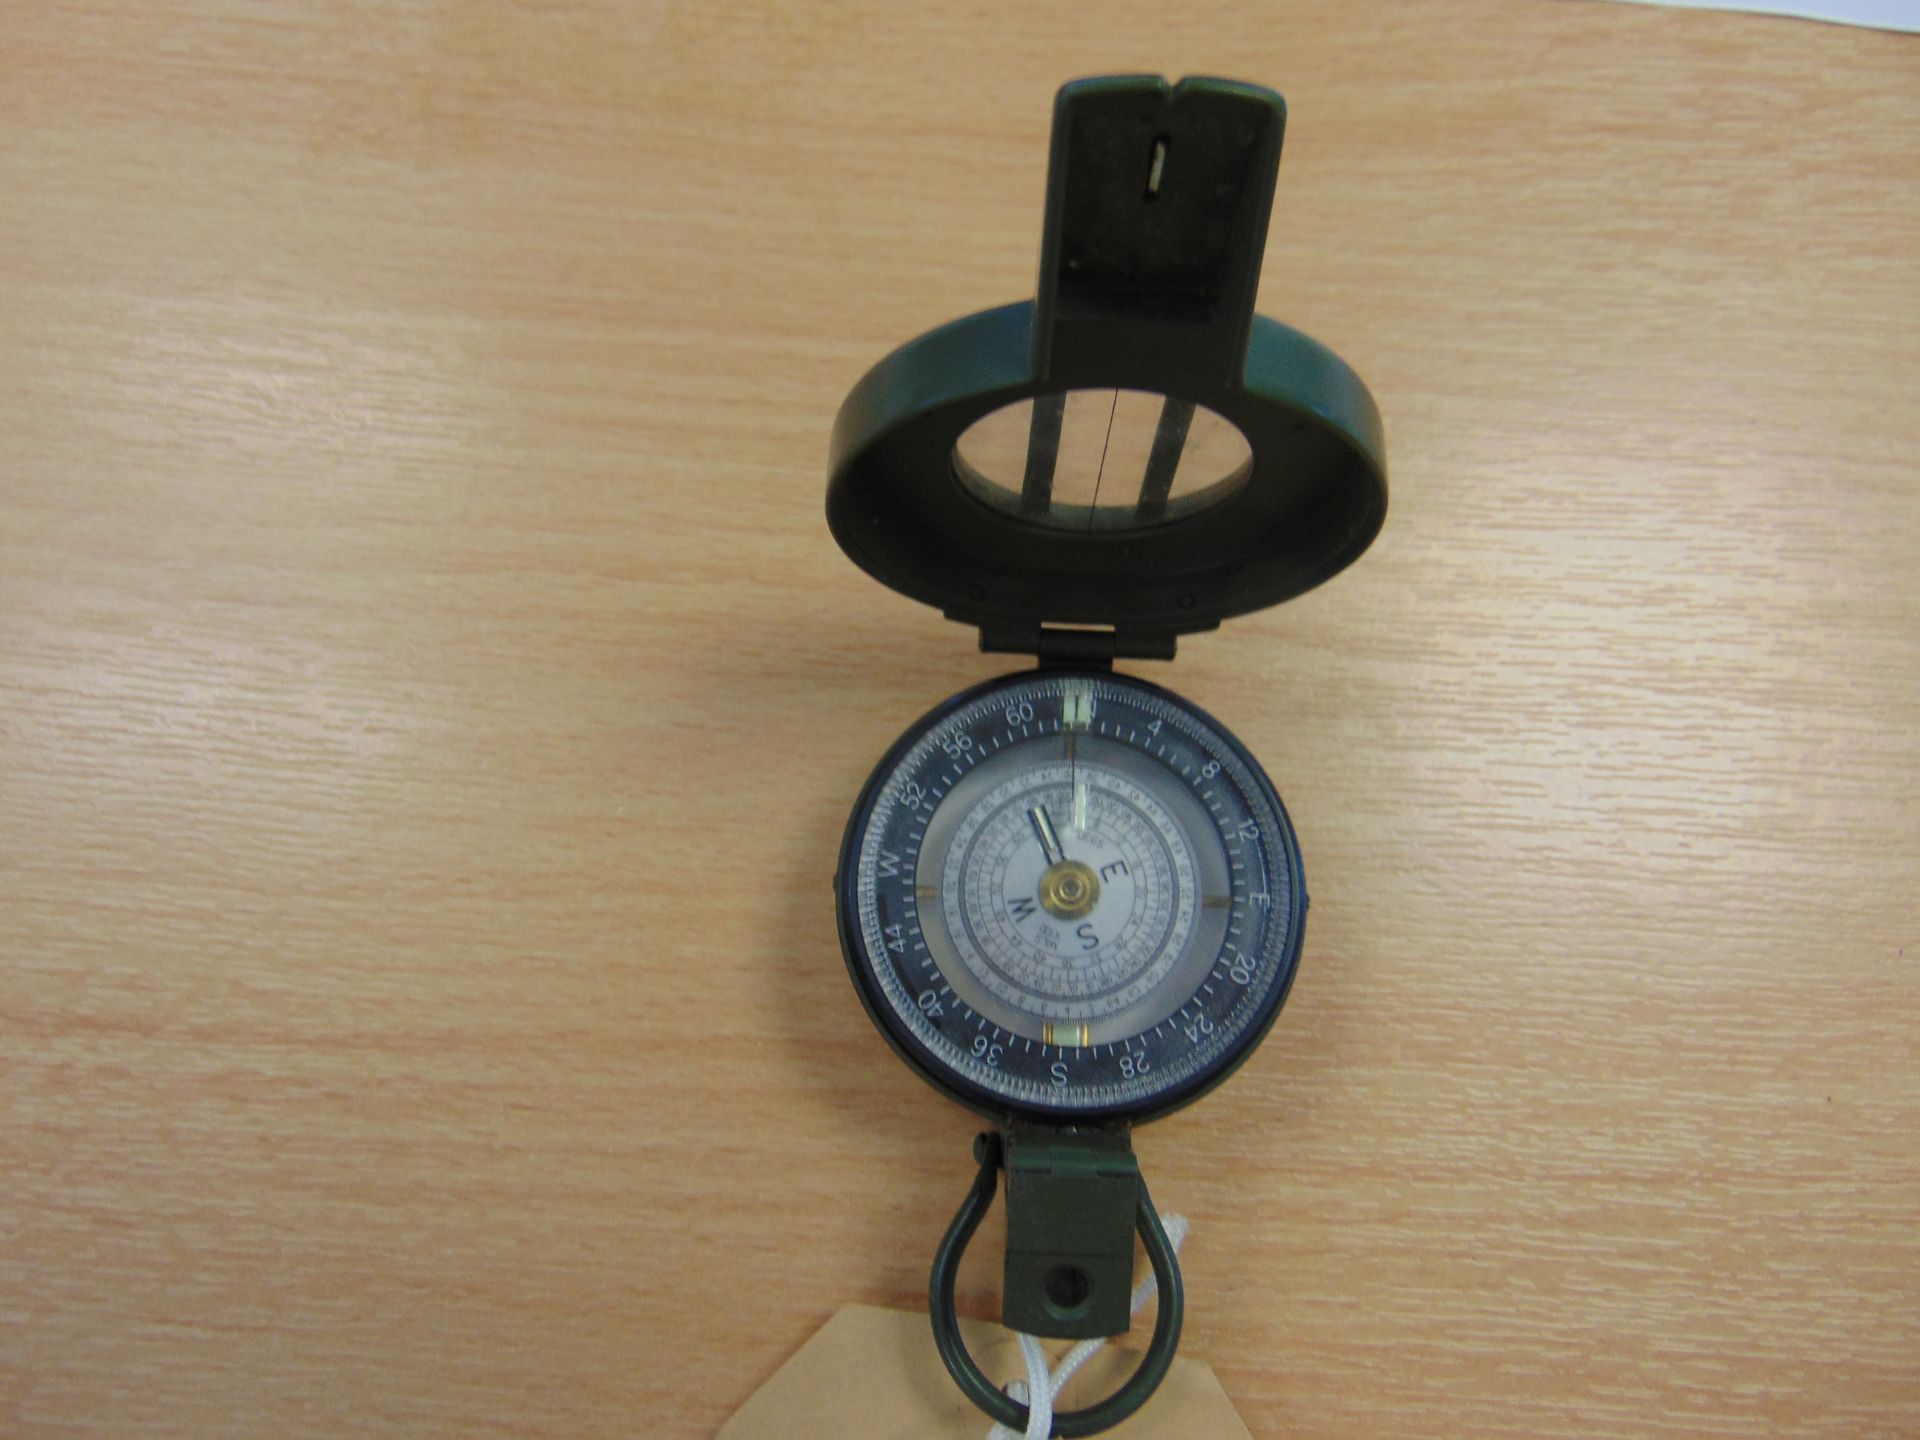 Francis Barker M88 British Army Prismatic Compass in Mils Nato Marks, Unissued Condition